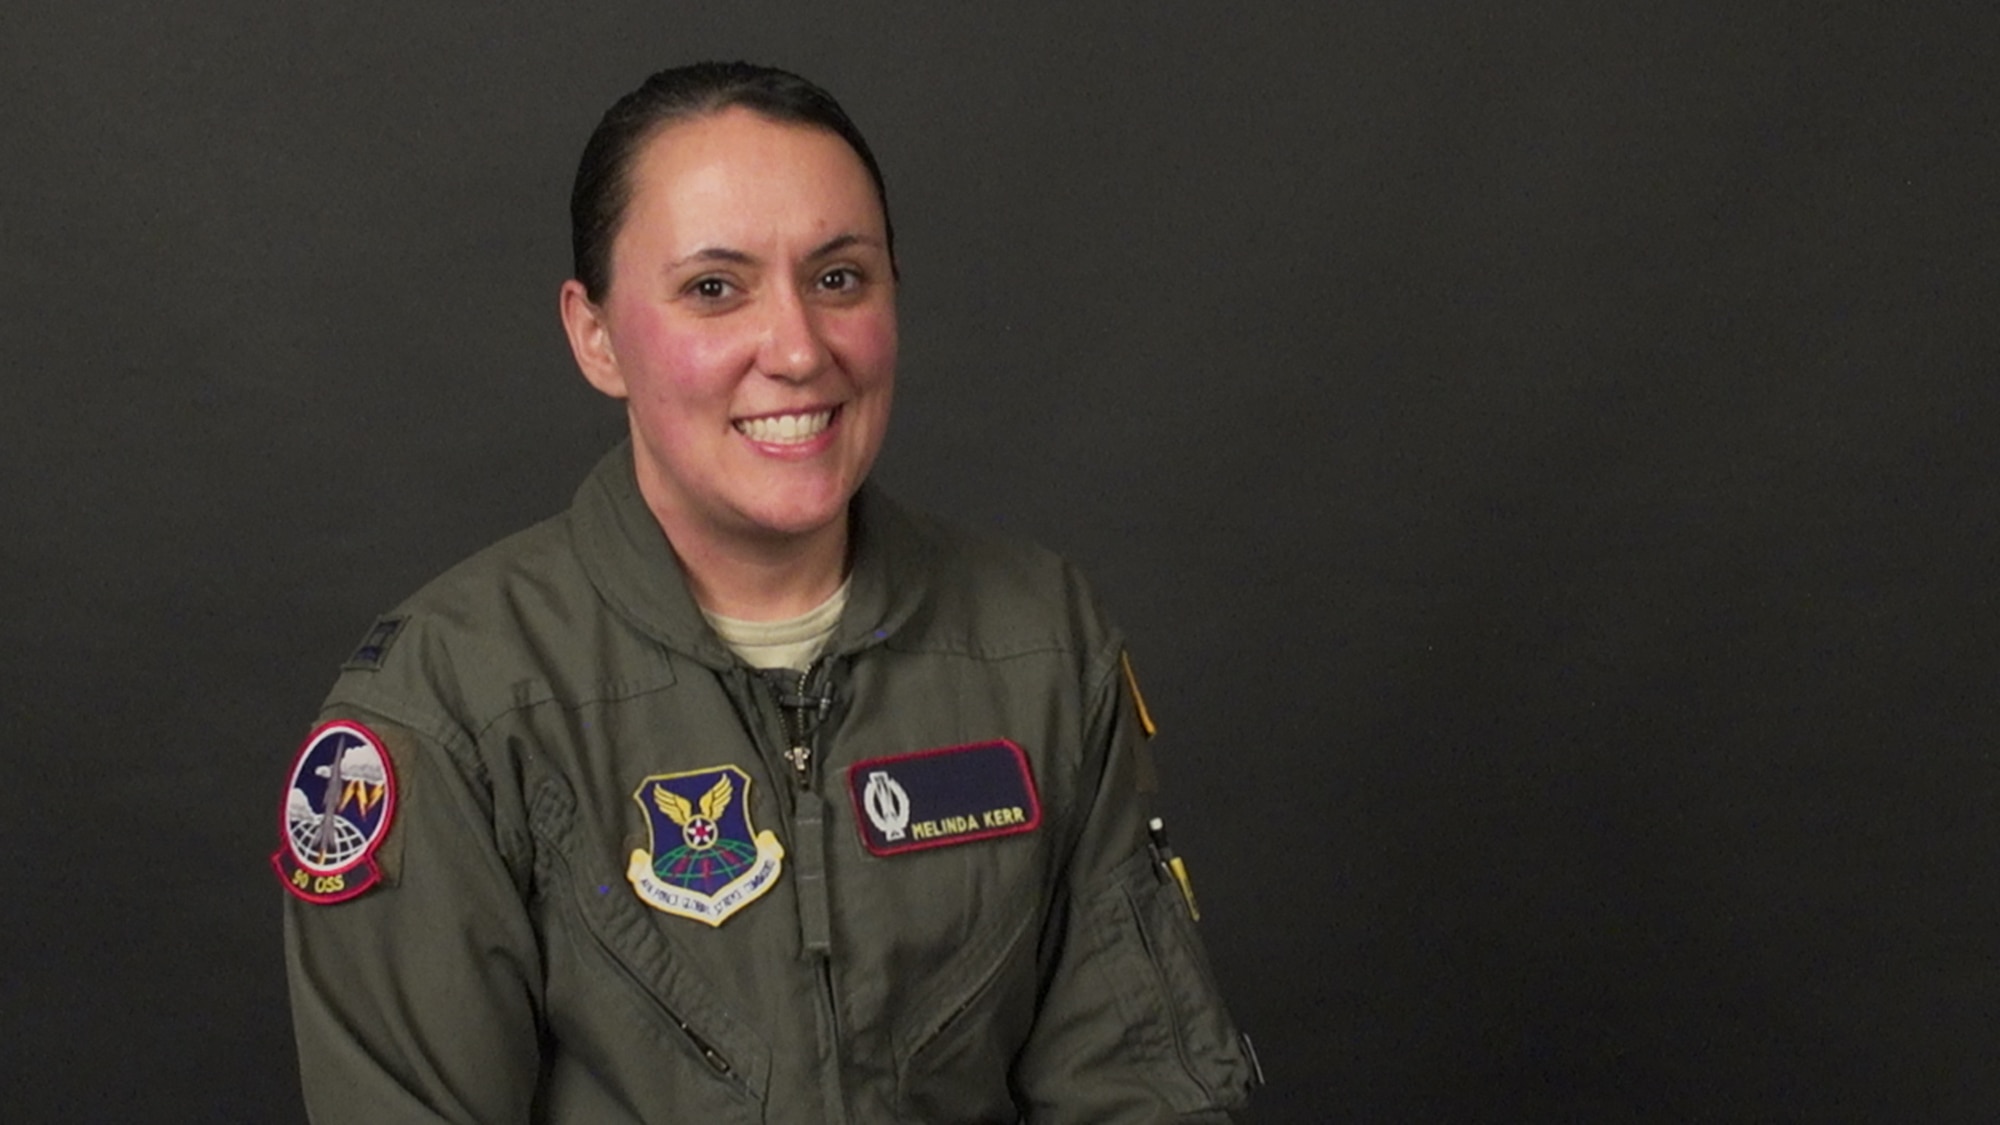 Capt. Melinda Kerr, F.E. Warren Company Grade Officer's Council president, conducts an interview on April 22, 2019, at the F.E. Warren base museum, Wyoming. She shares her account of why 1st Lt. Tenaugrie "Ten" Malone, 321st Missile Squadron assistant flight commander, earned the Air Force Global Strike Command's NAACP Roy Wilkins Renowned Service Award. (U.S. Air Force photo by 1st Lt. Nikita Thorpe)